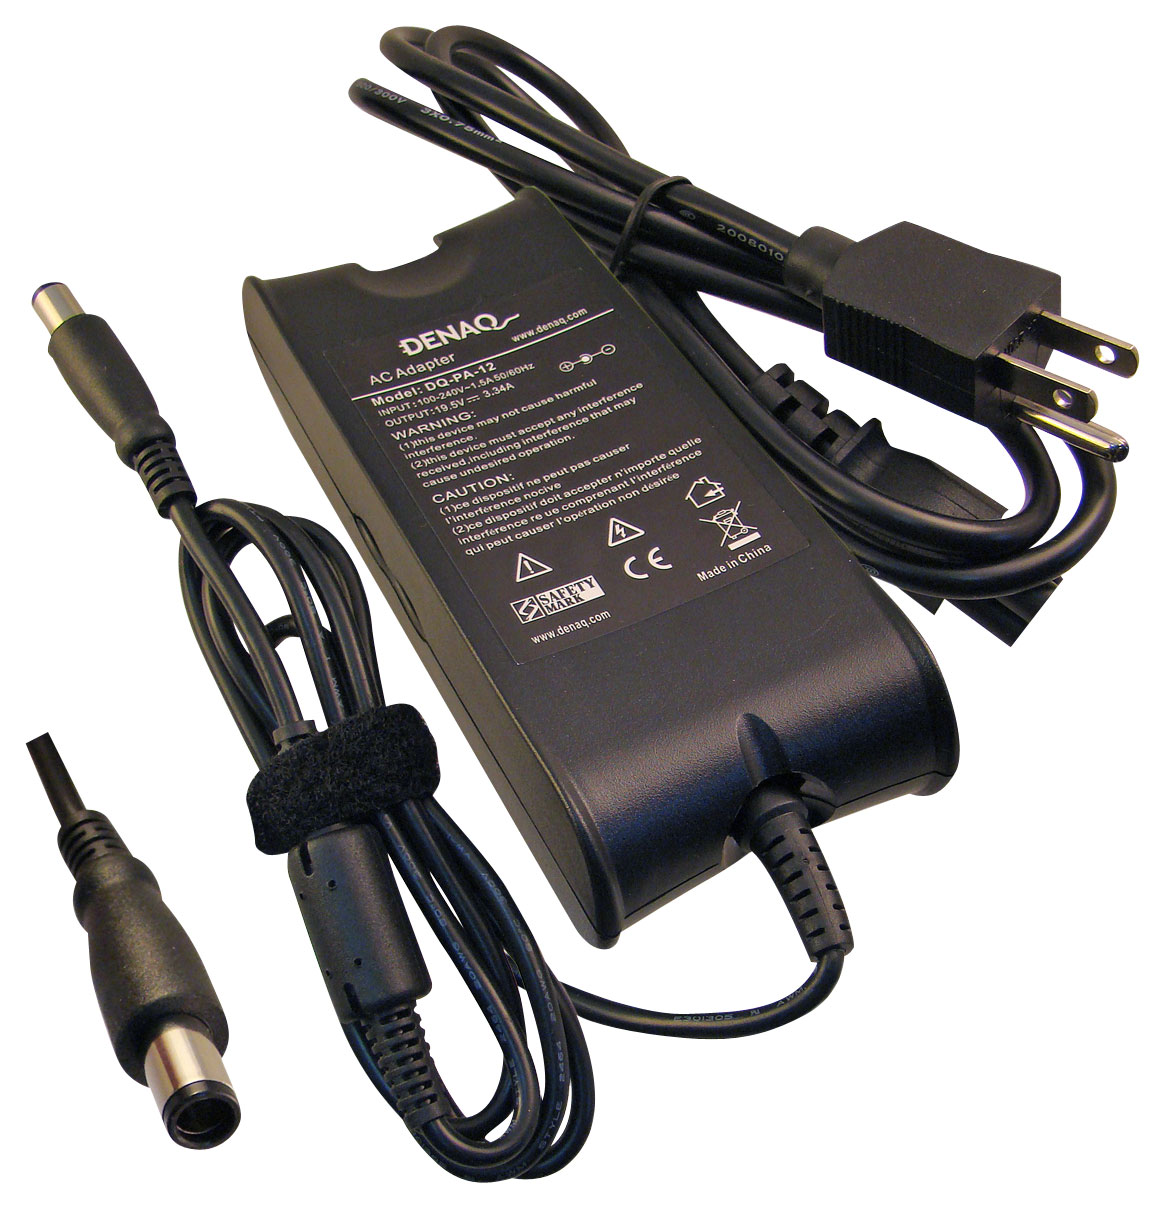 DENAQ AC Power and Charger for Select Dell Laptops Black DQ-PA-12-7450 Best Buy